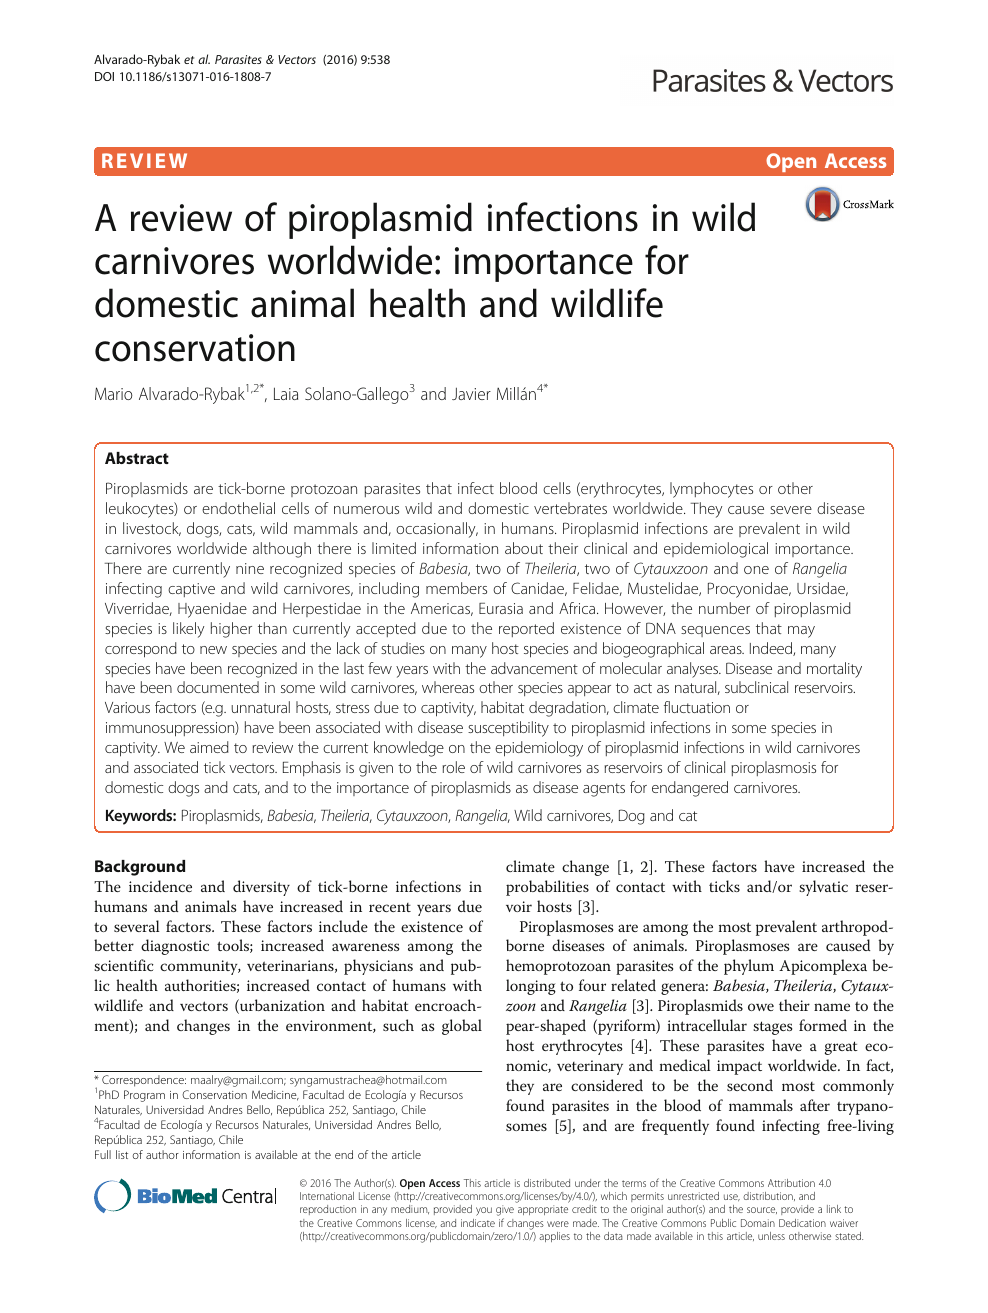 A review of piroplasmid infections in wild carnivores worldwide: importance  for domestic animal health and wildlife conservation – topic of research  paper in Veterinary science. Download scholarly article PDF and read for